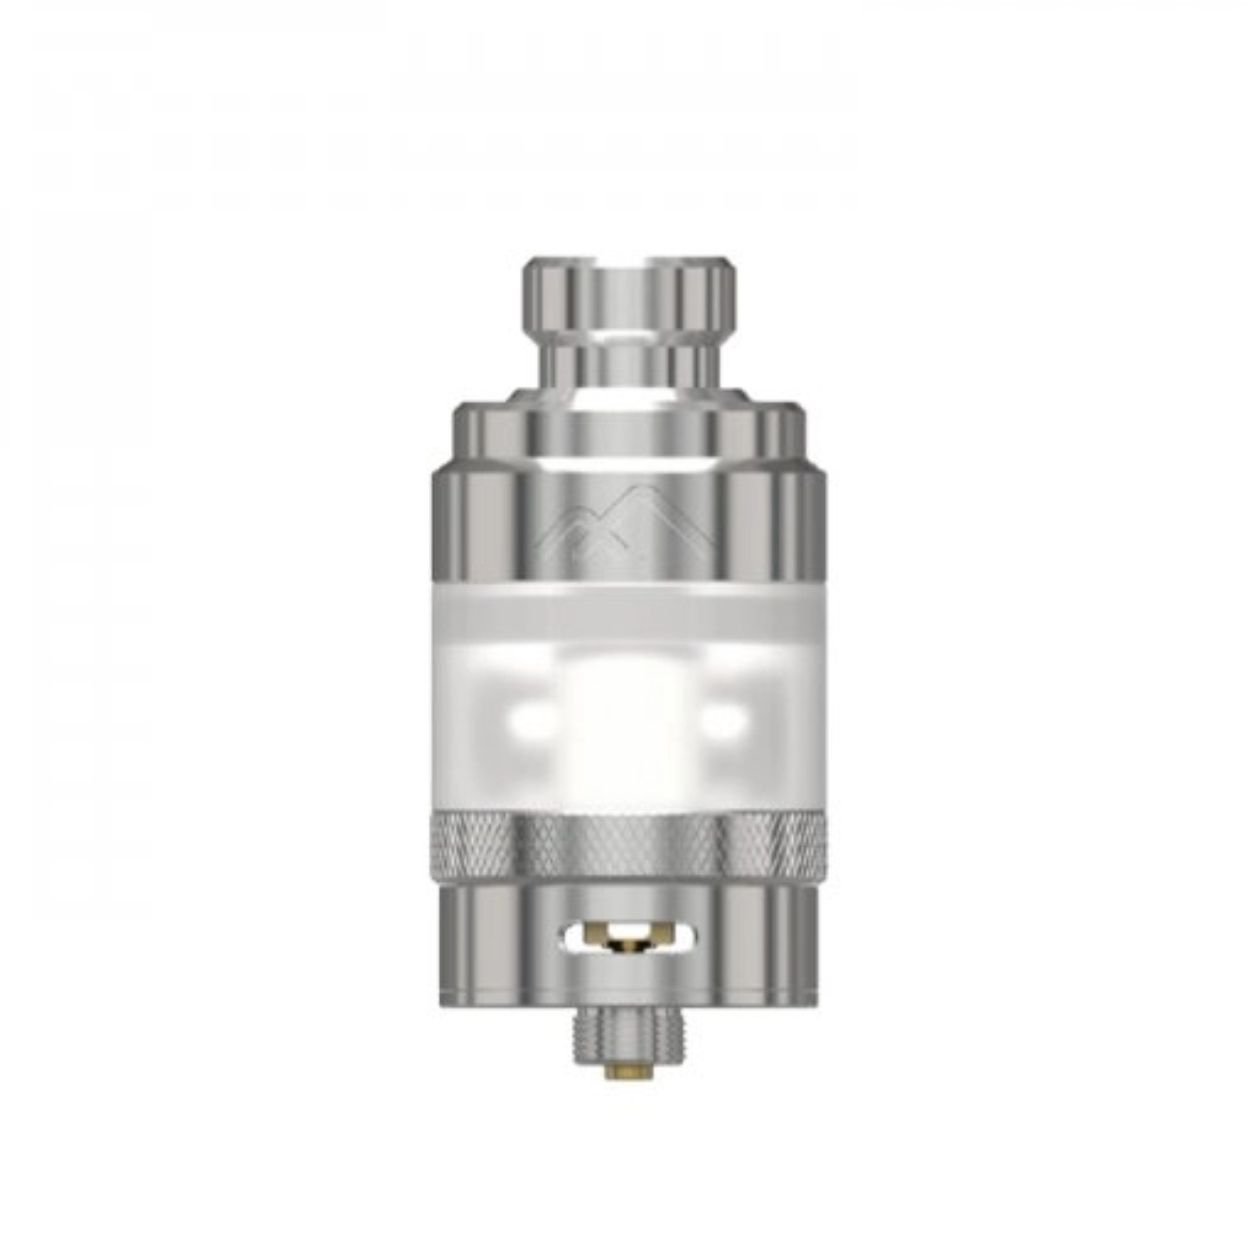 Aromamizer plus rdta by steam crave фото 47